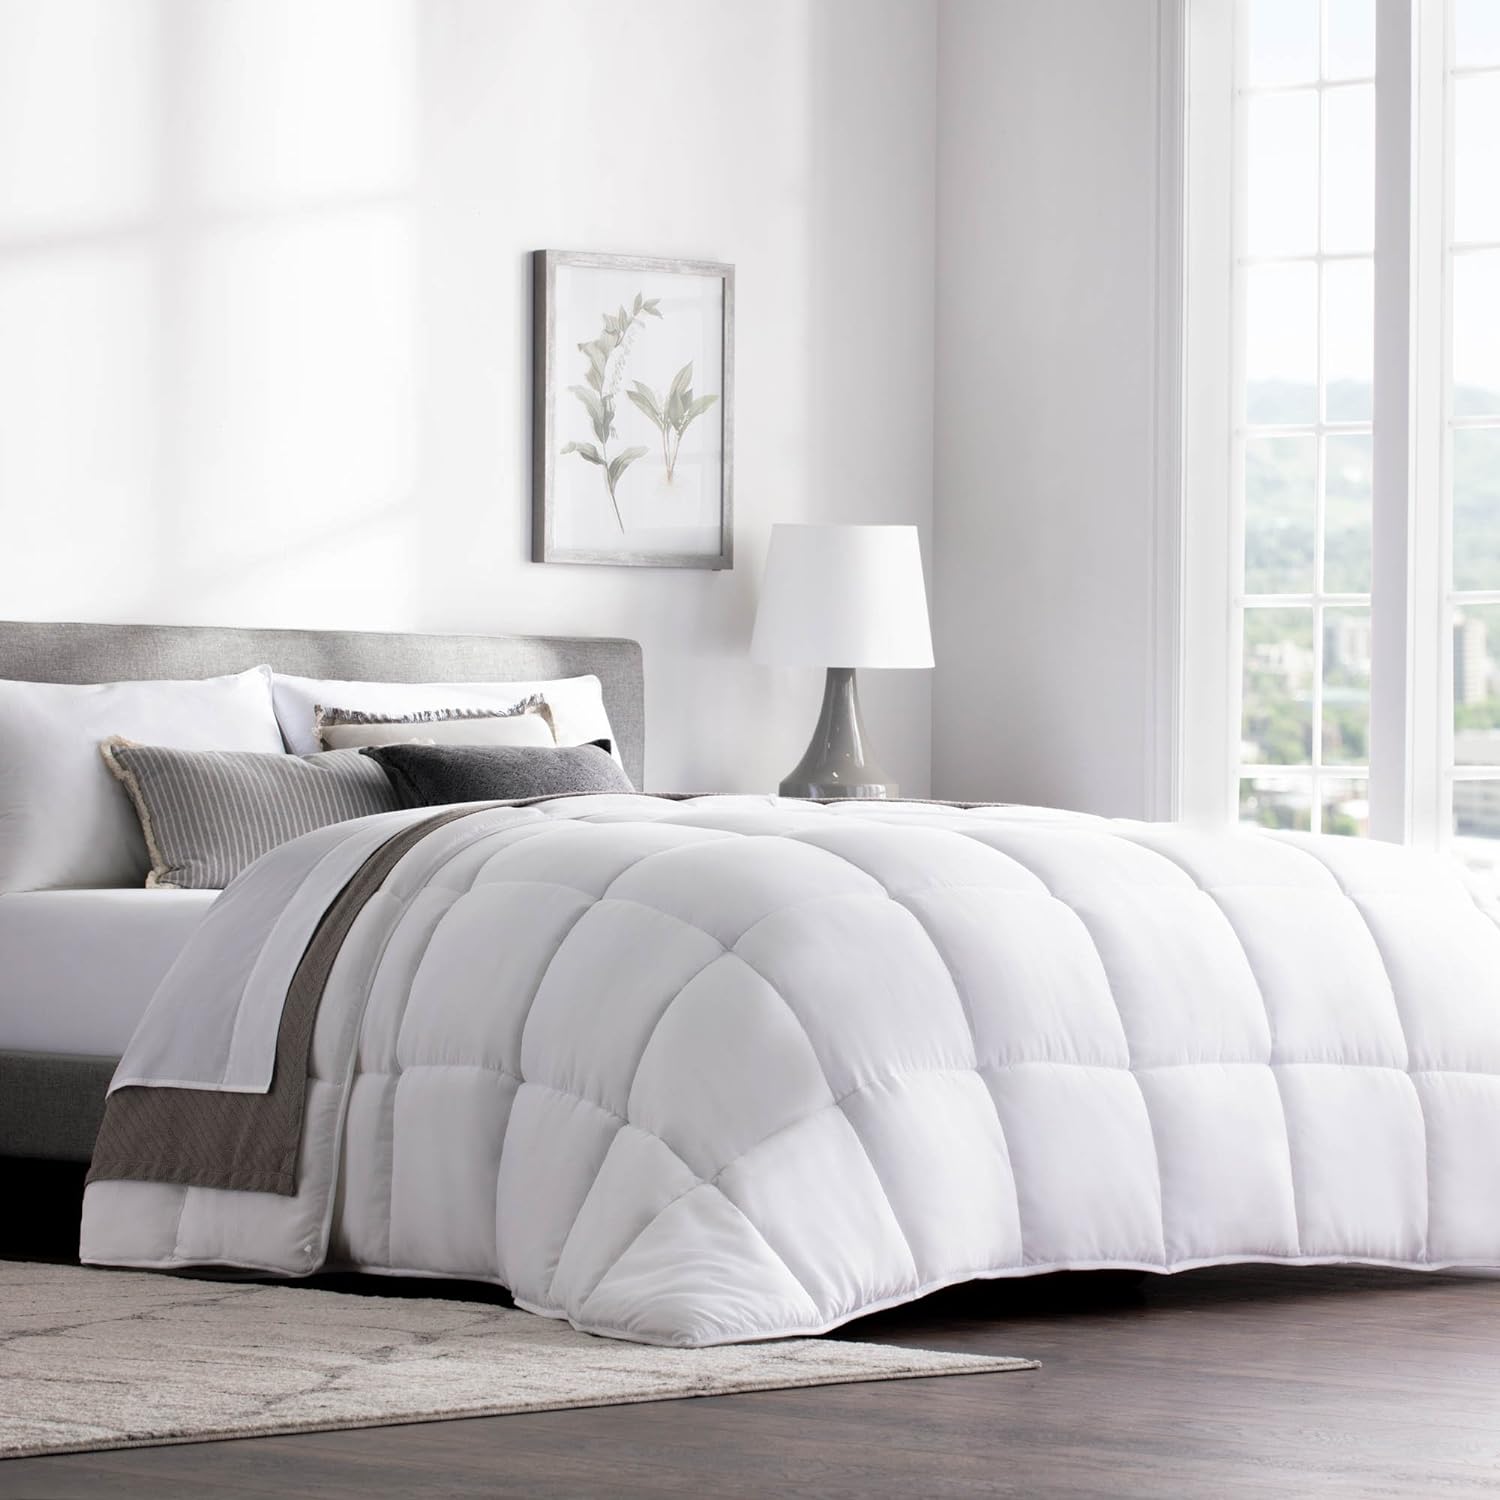 WEEKENDER Comforter Duvet Insert King White Quilted Down Alternative All Season Microfiber - King - Box Stitched